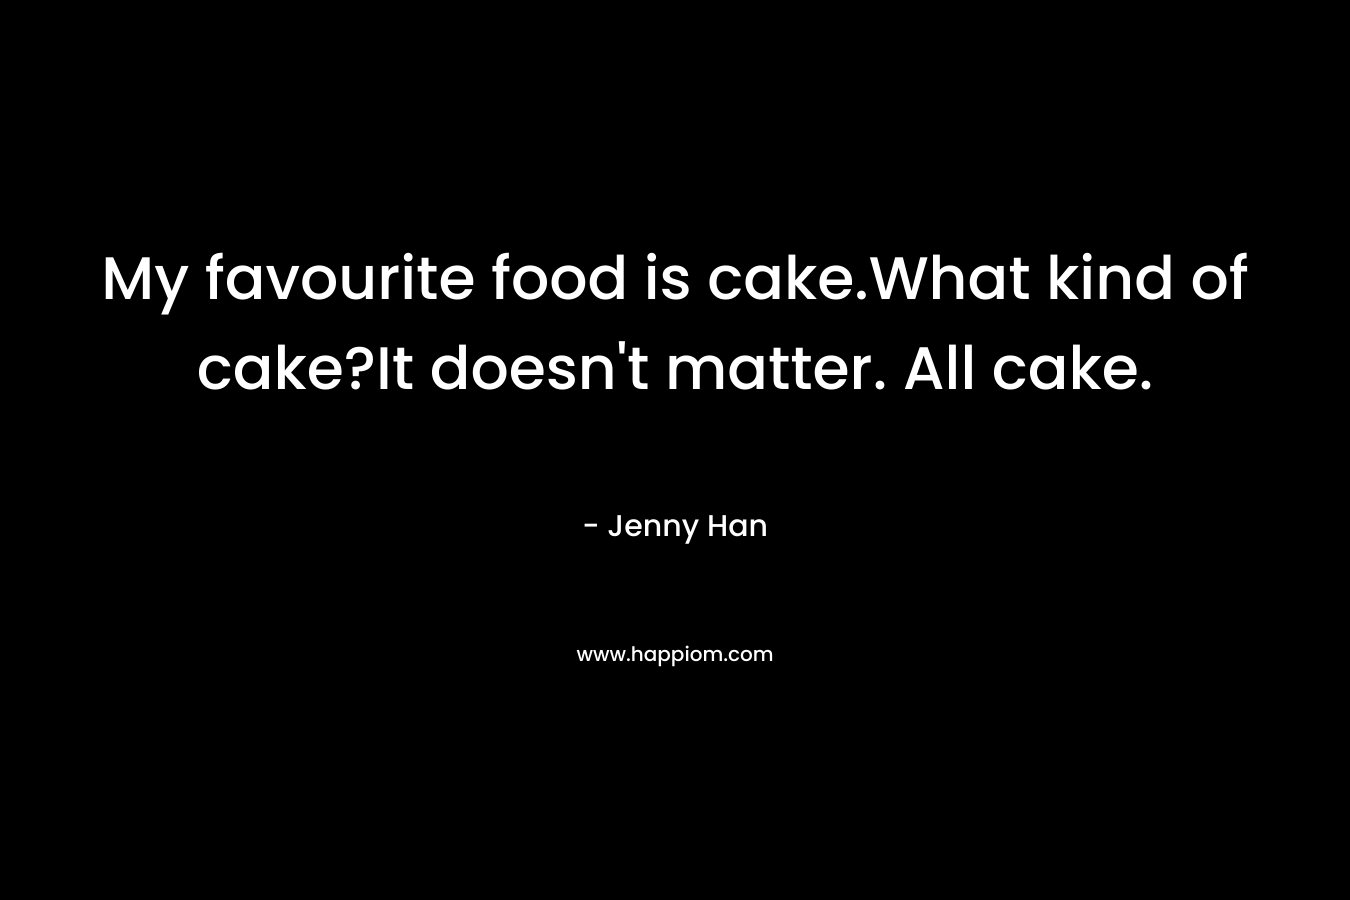 My favourite food is cake.What kind of cake?It doesn't matter. All cake.